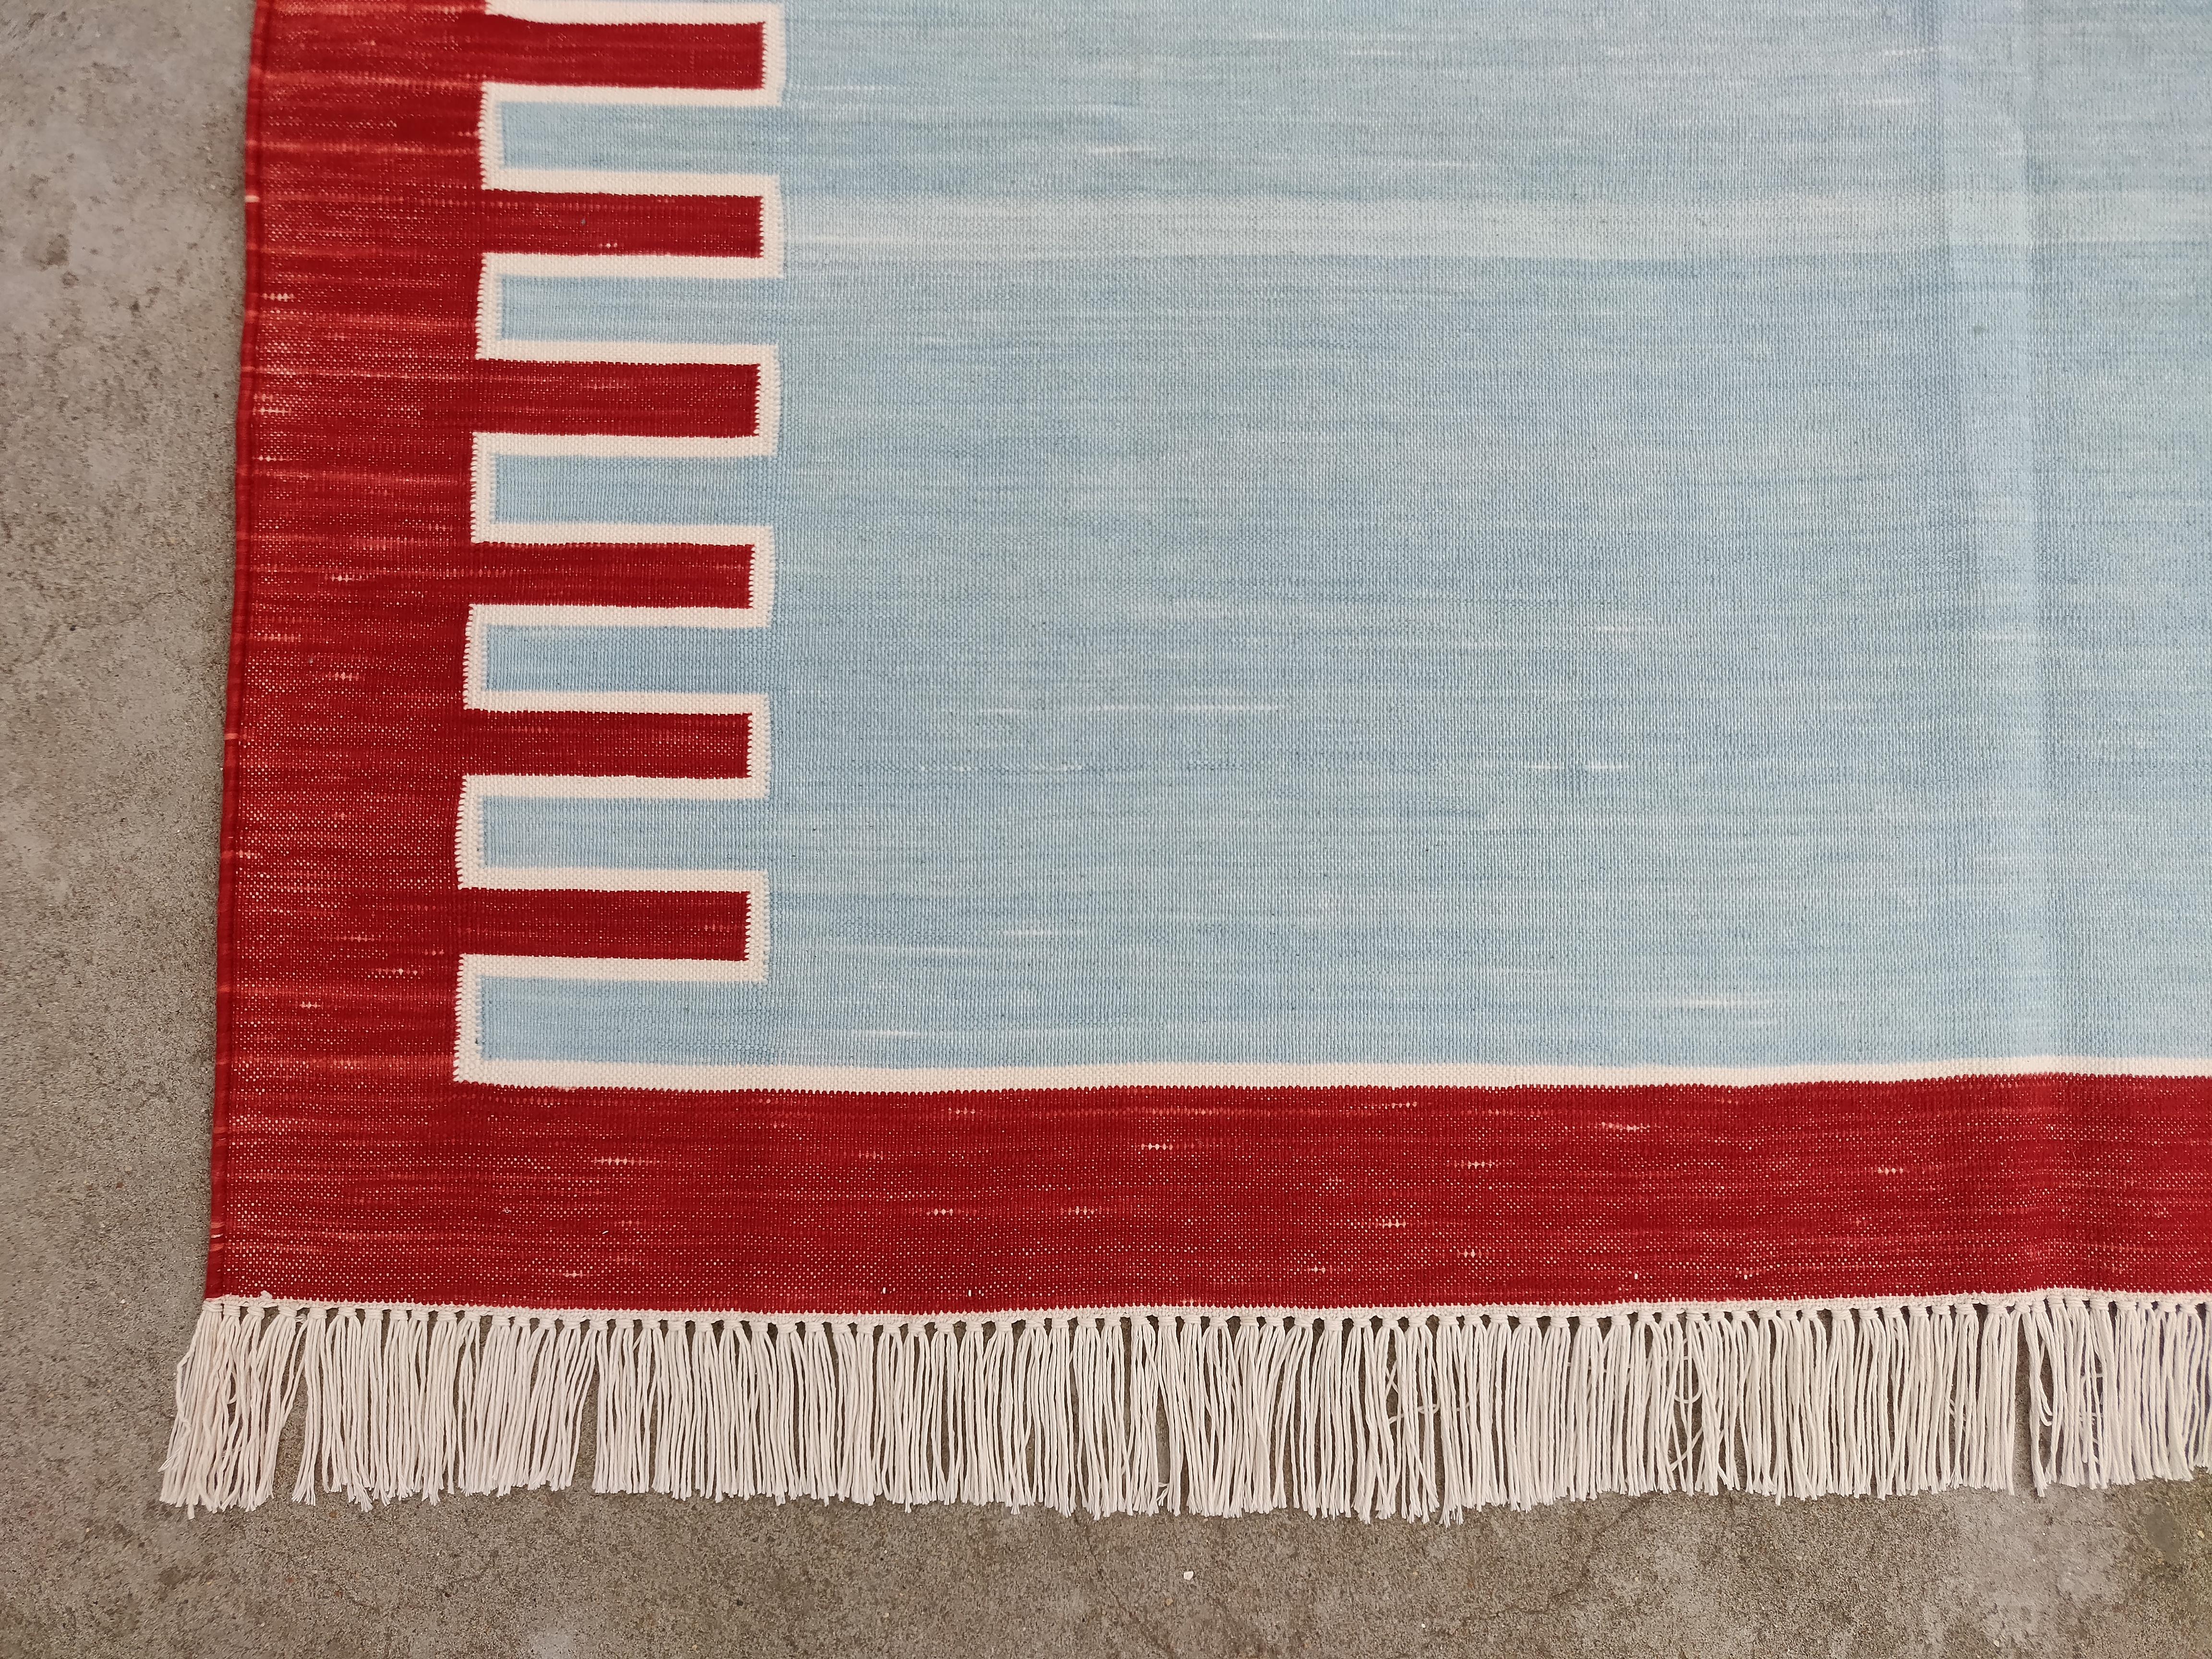 Contemporary Handmade Cotton Area Flat Weave Rug, 4x6 Sky Blue And Red Striped Indian Dhurrie For Sale